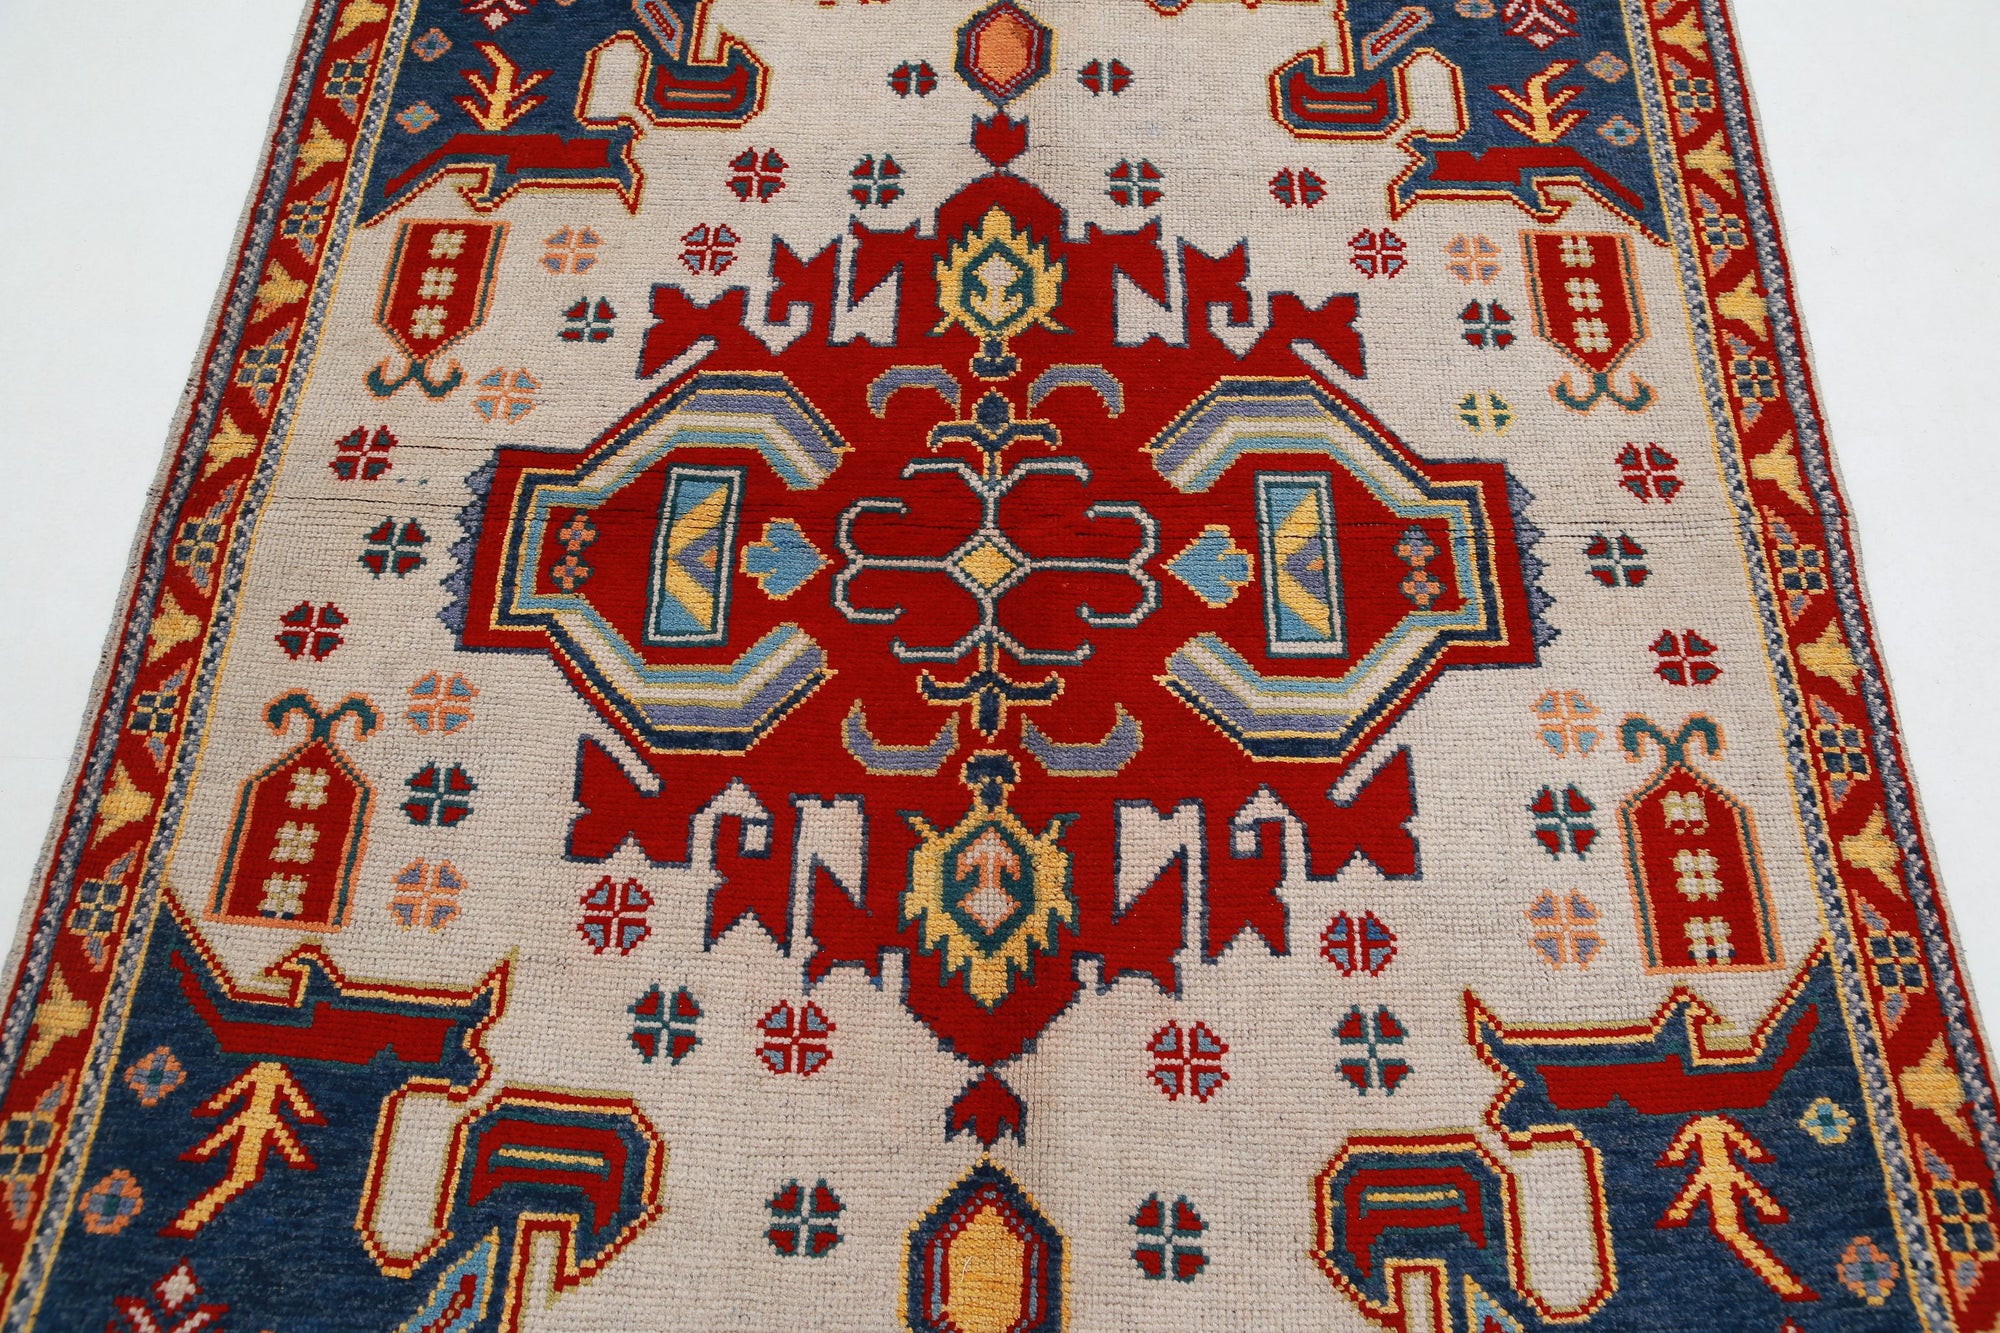 Revival-hand-knotted-qarghani-wool-rug-5014218-4.jpg